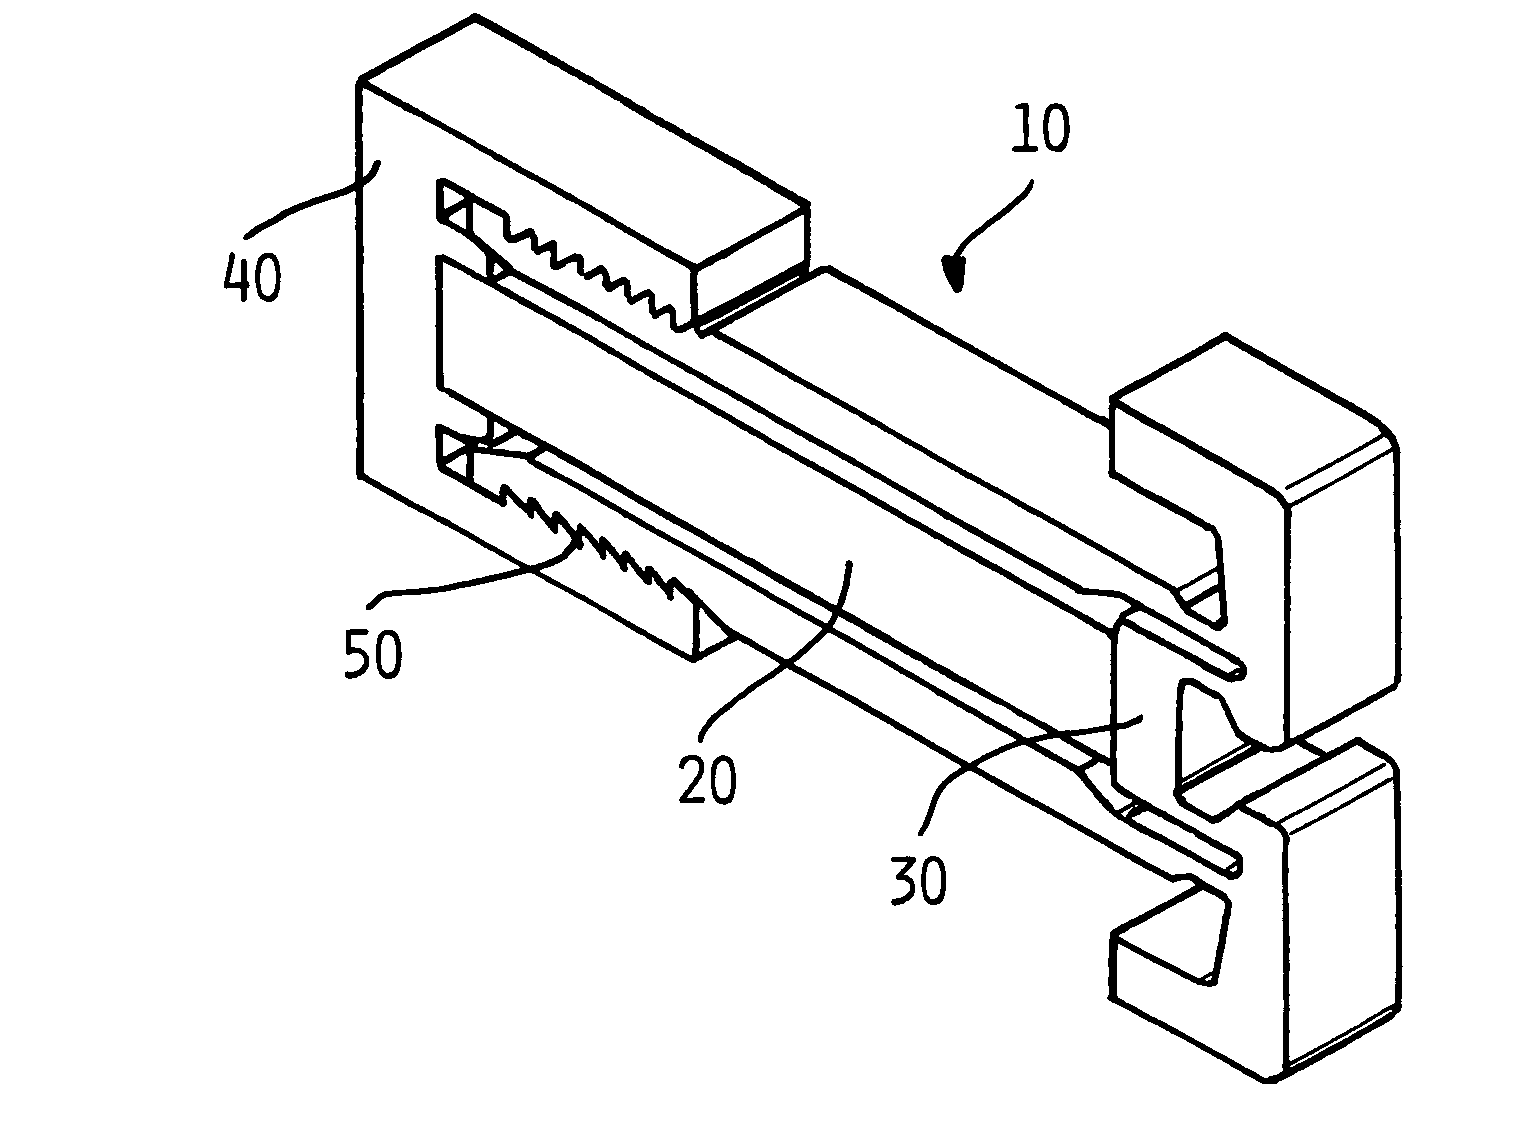 Apparatus and process for optimizing work from a smart material actuator product